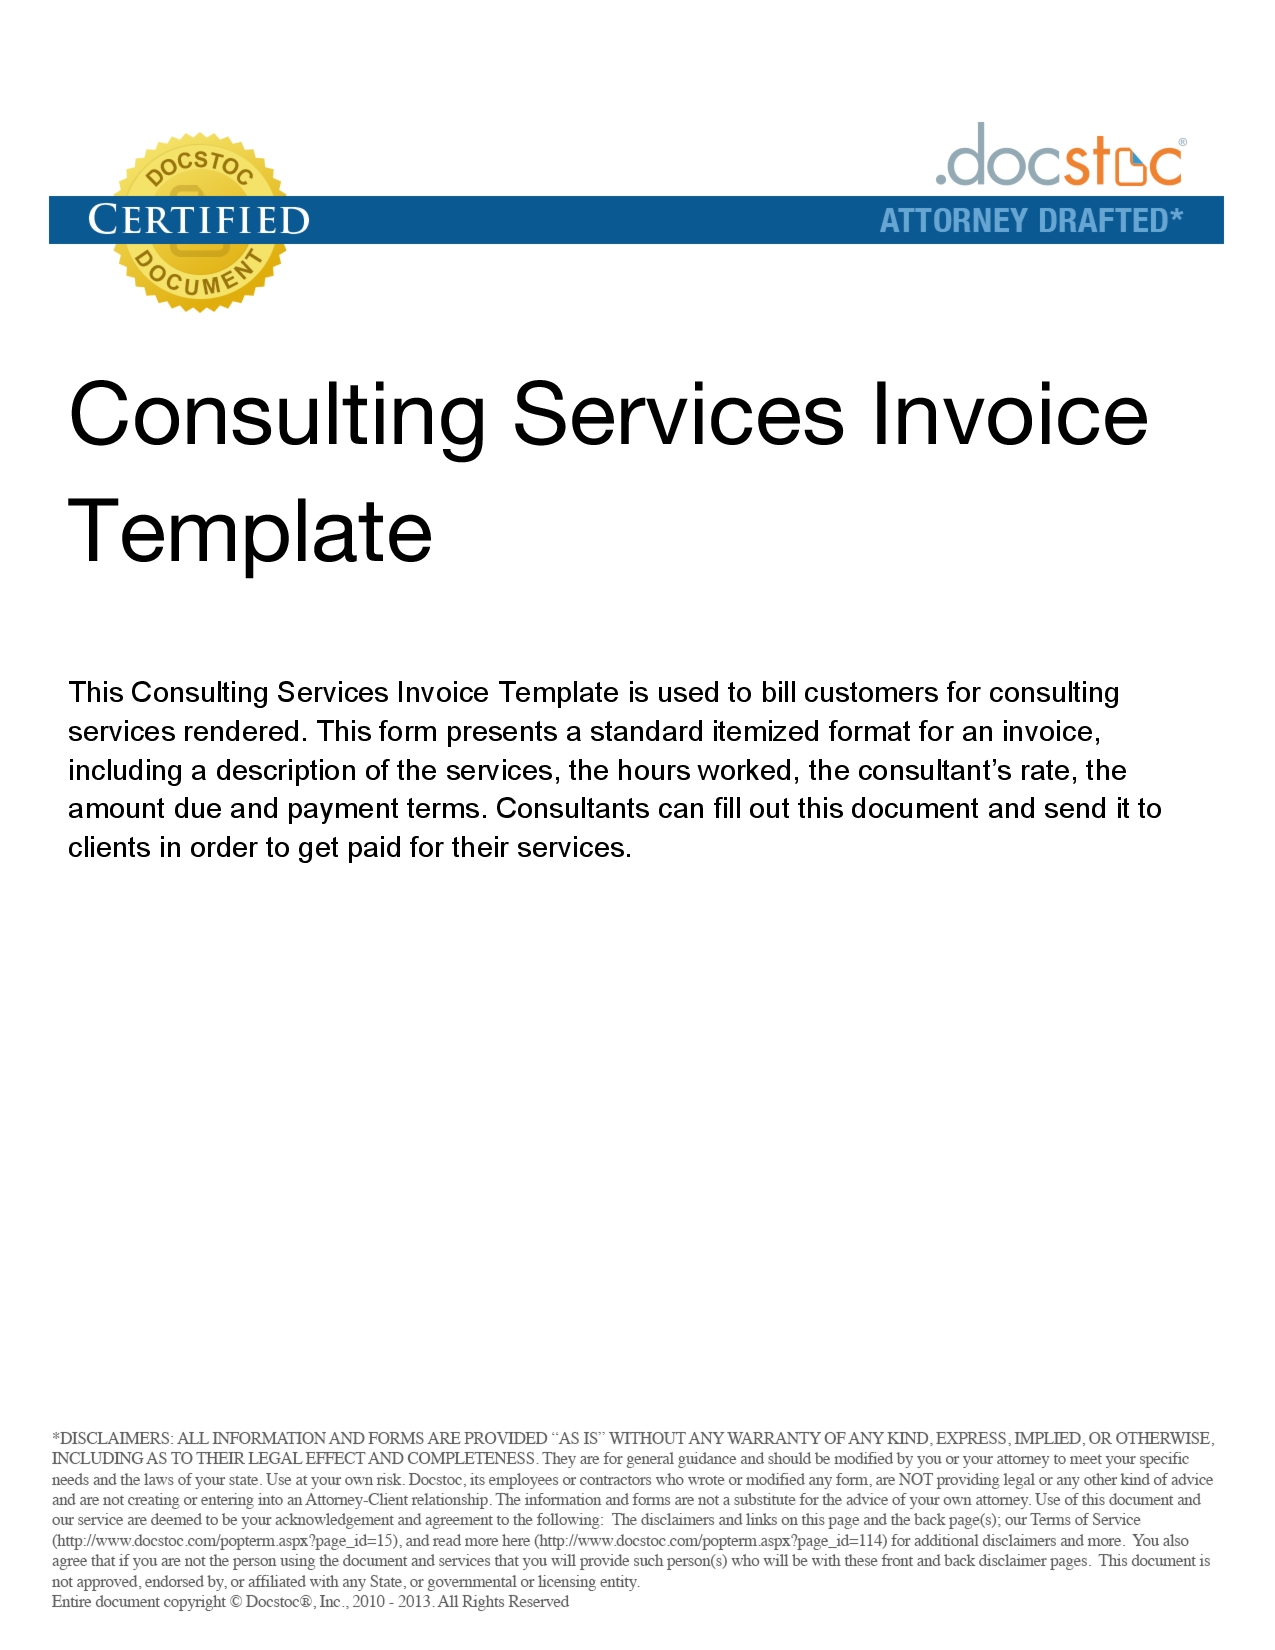 consulting services invoice invoice for consulting services invoice templat free printable 1275 X 1650